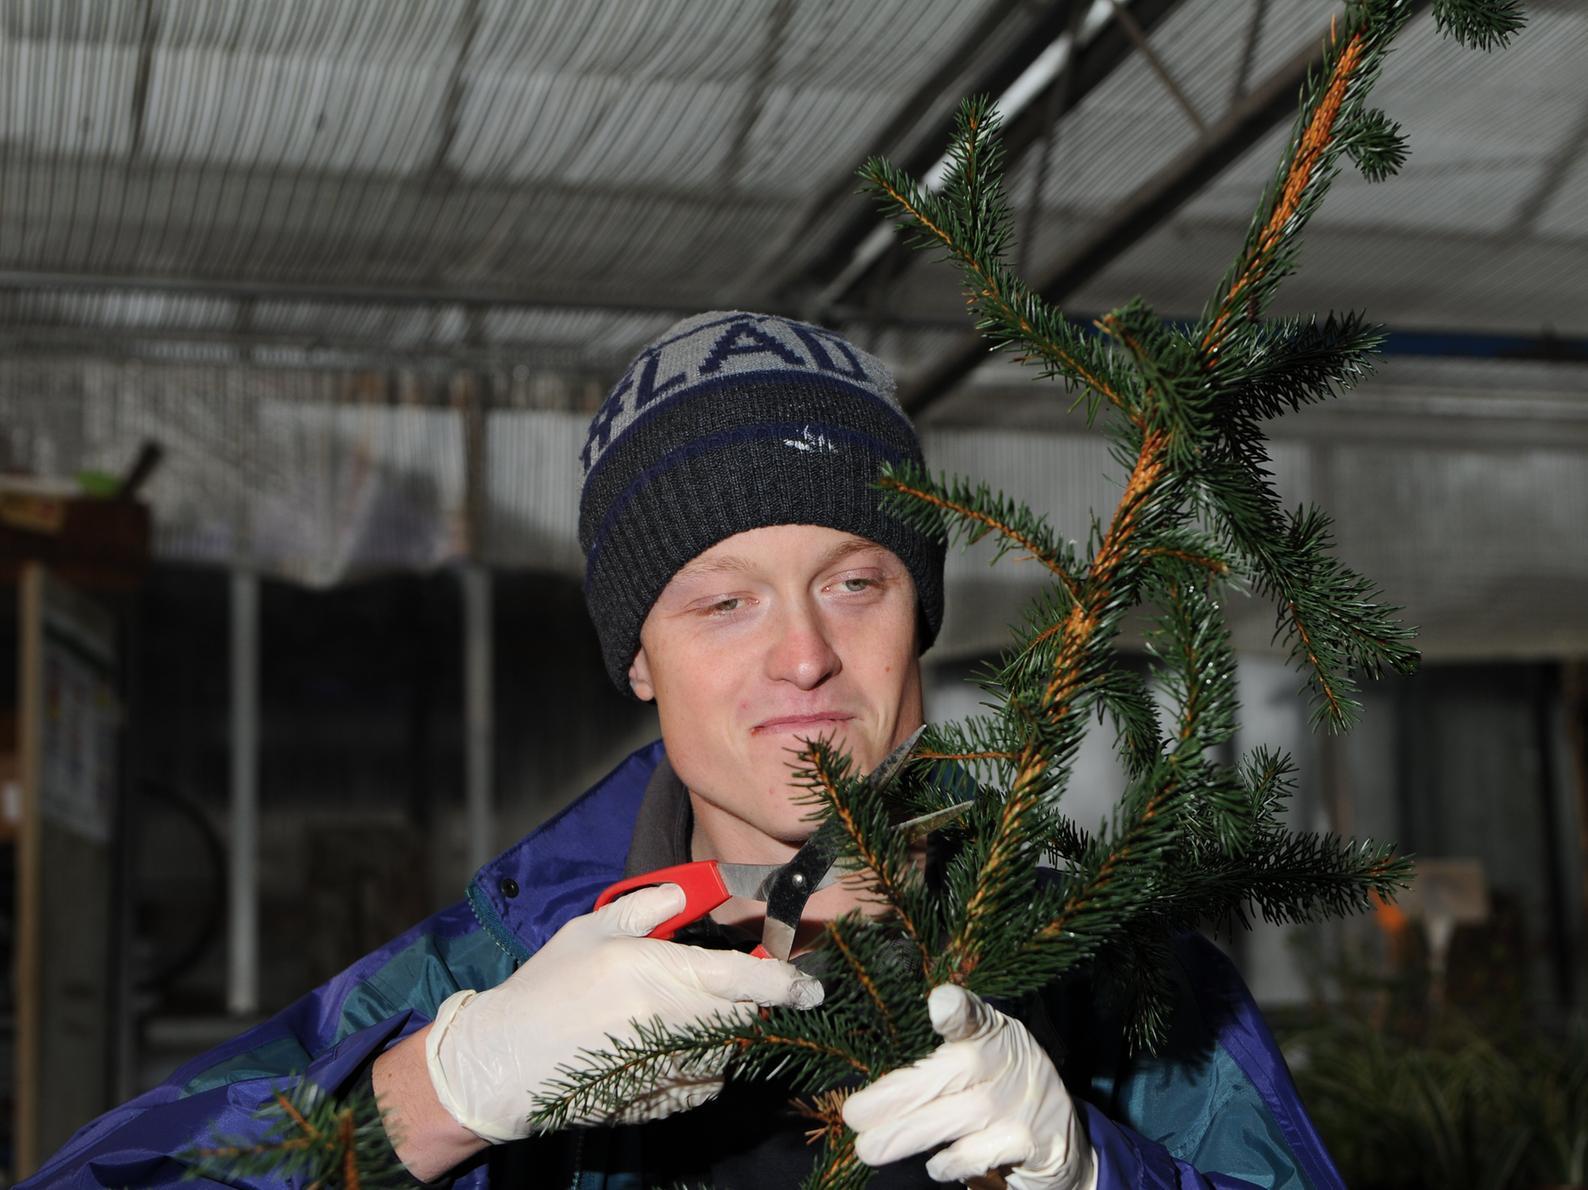 Scott Tesseyman trimming conifer pieces for the wreaths.